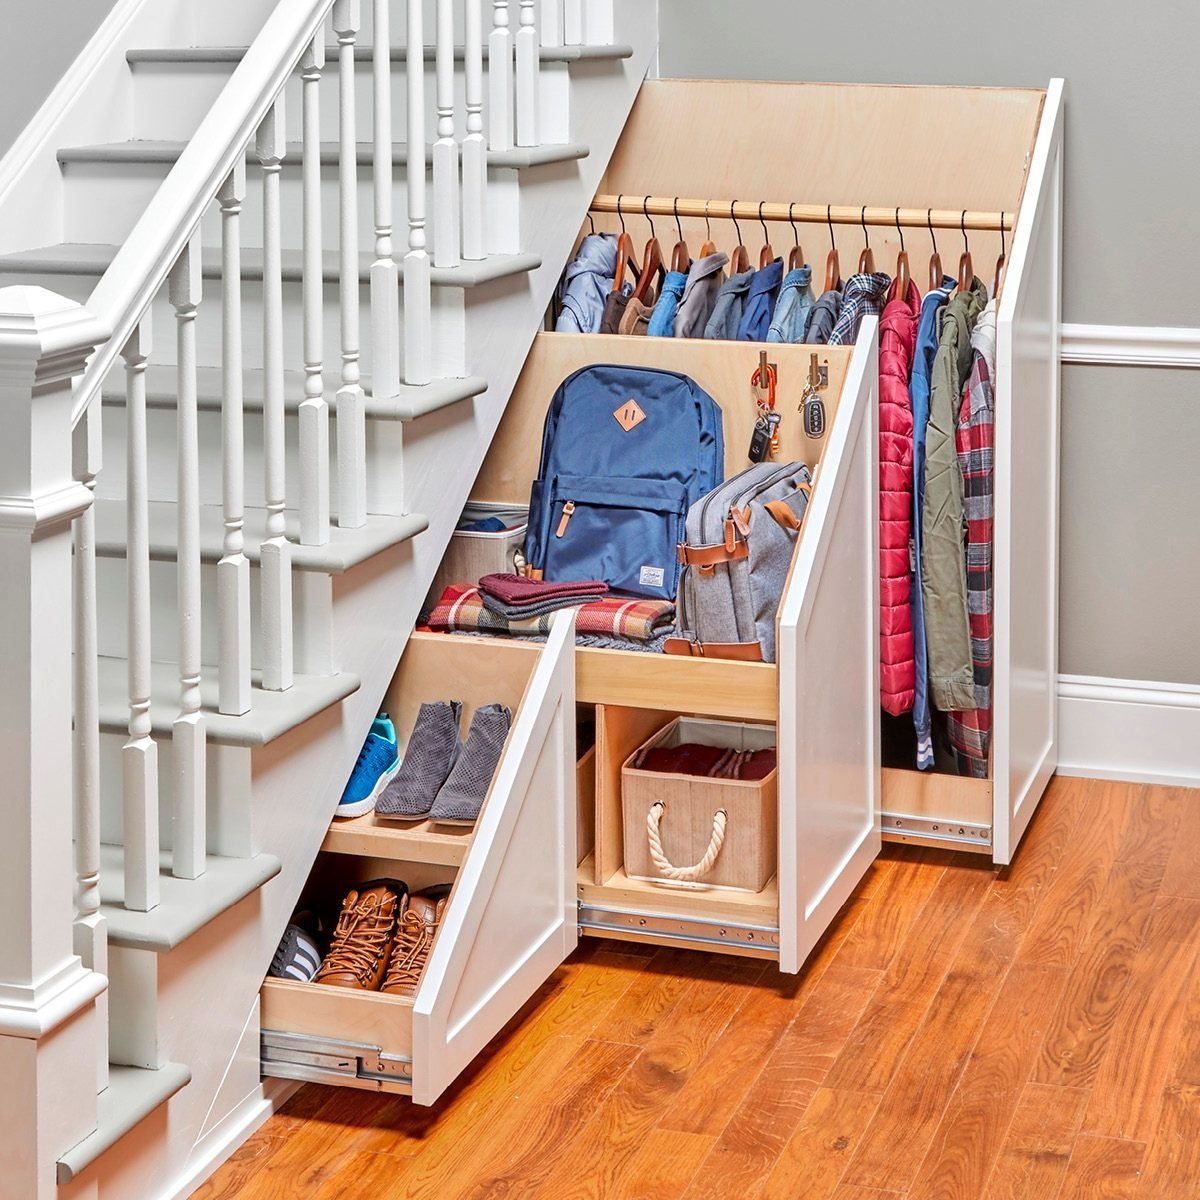 How to Build an Under-the-Stairs Storage Unit